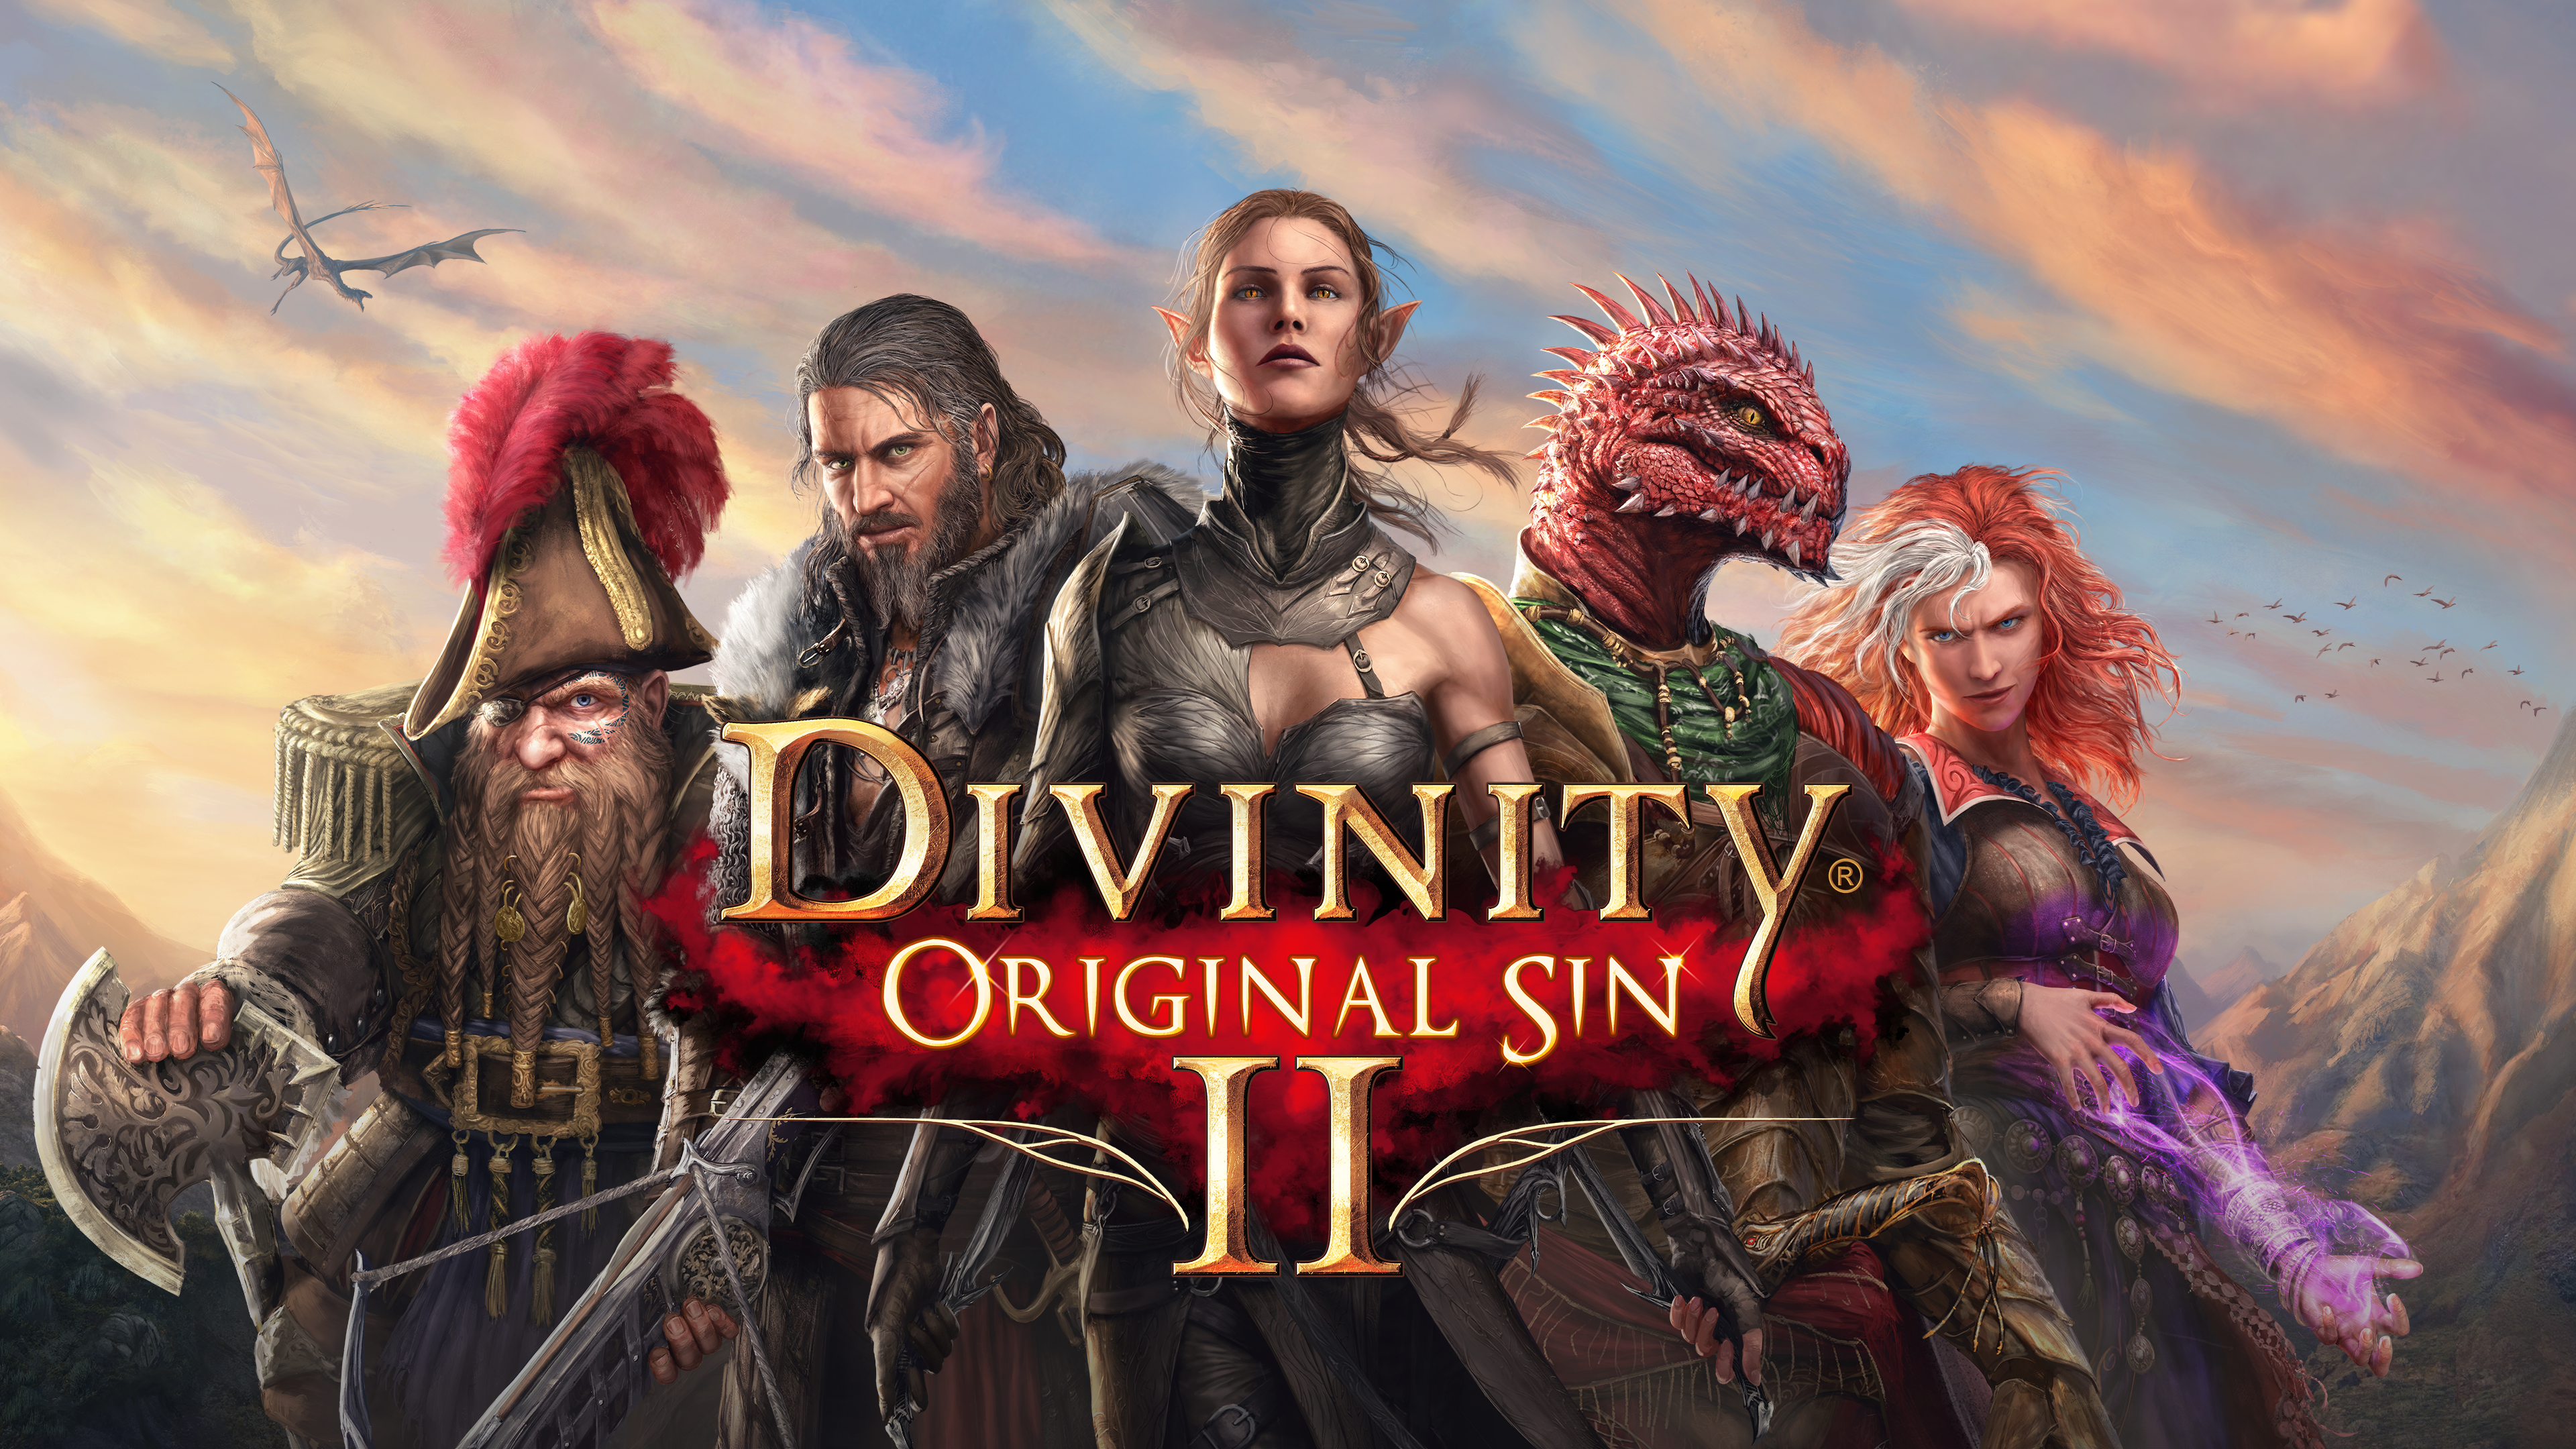 Divinity original sin ii hd papers and backgrounds